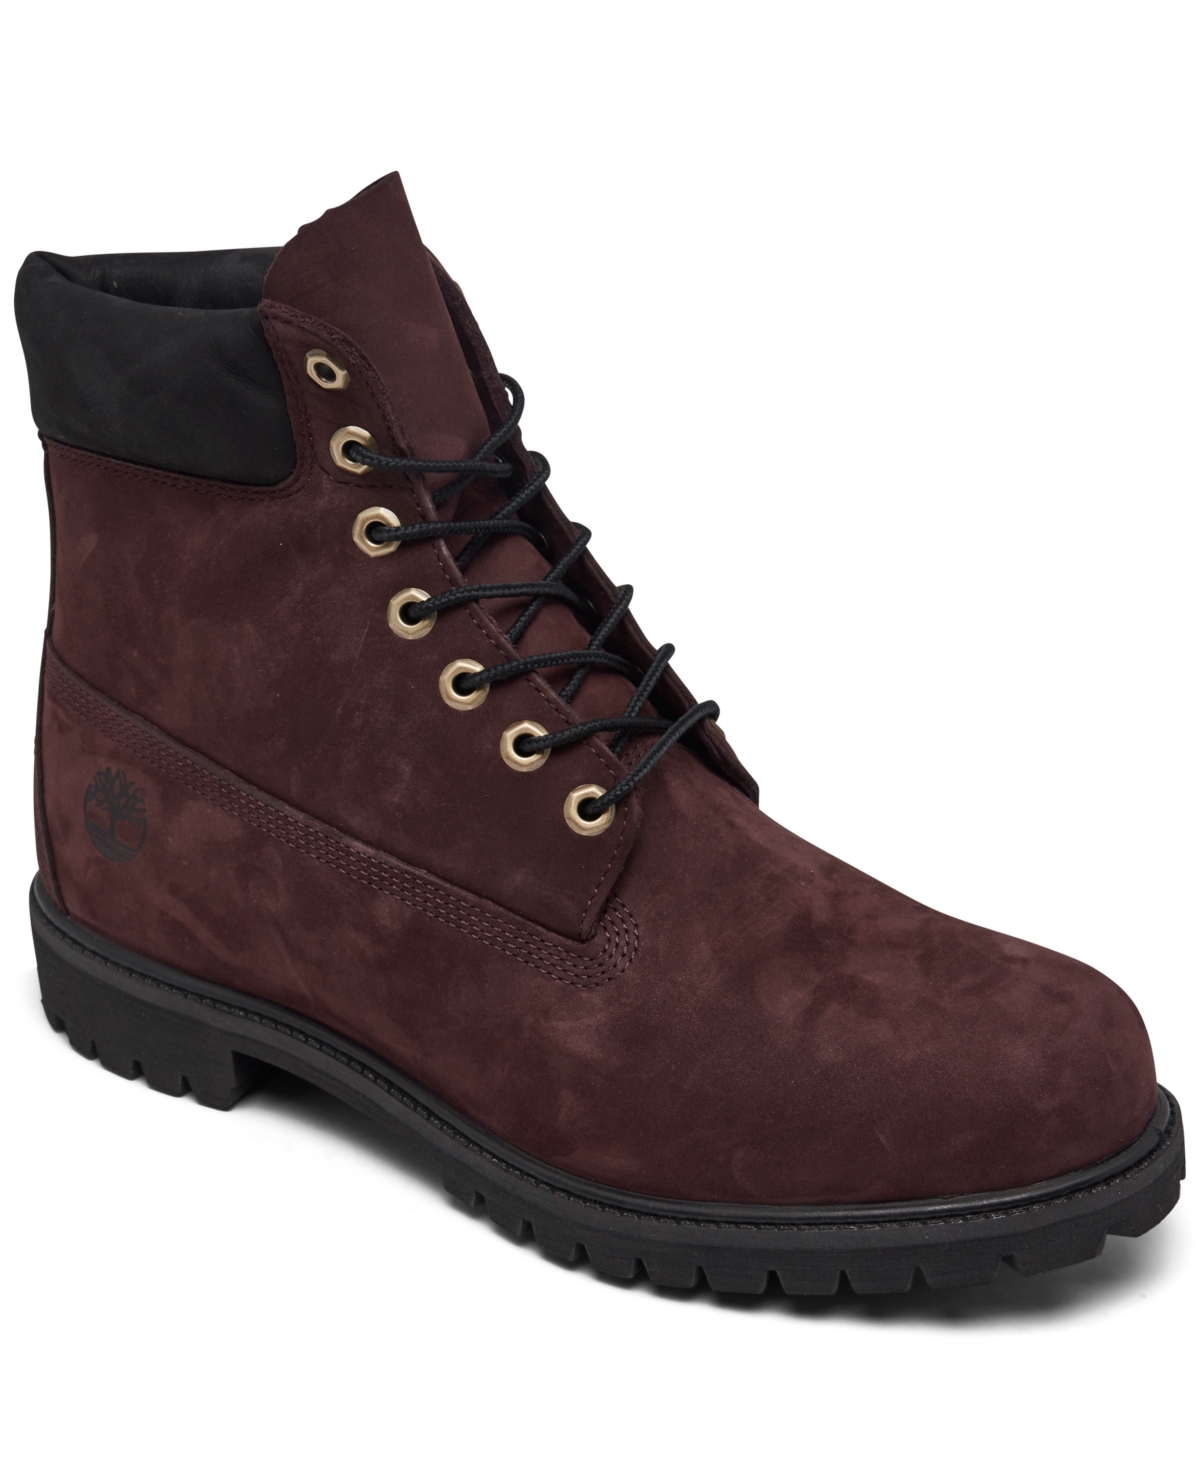 Timberland Men's 6" Classic Treadlight Water-resistant Boots From Finish Line In Burgundy